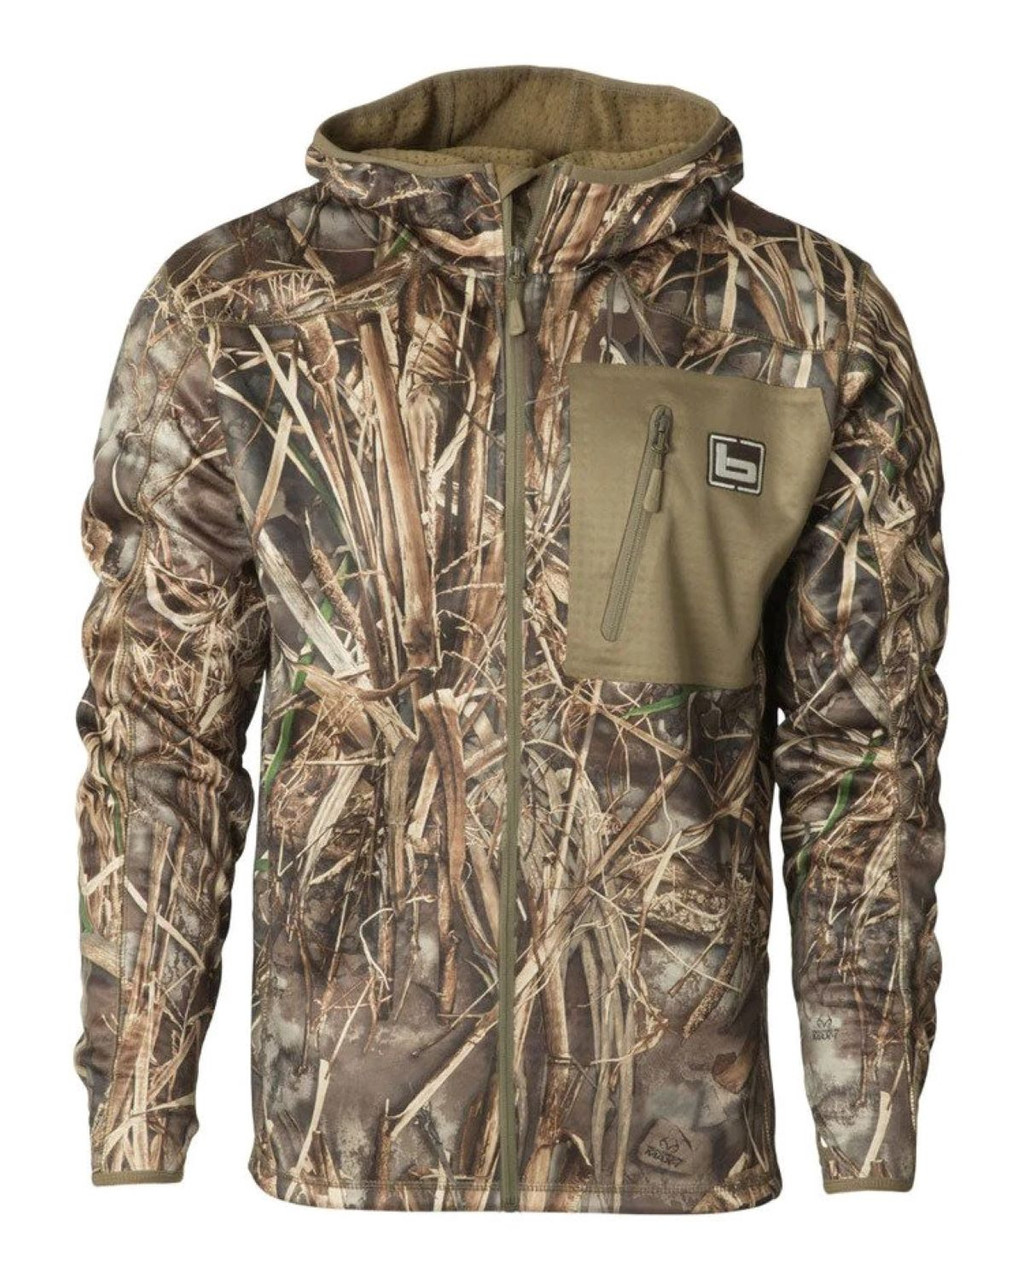 Banded Hooded Mid-Layer Fleece Jacket - Realtree - MAX7 - B1010062-M7-2XL